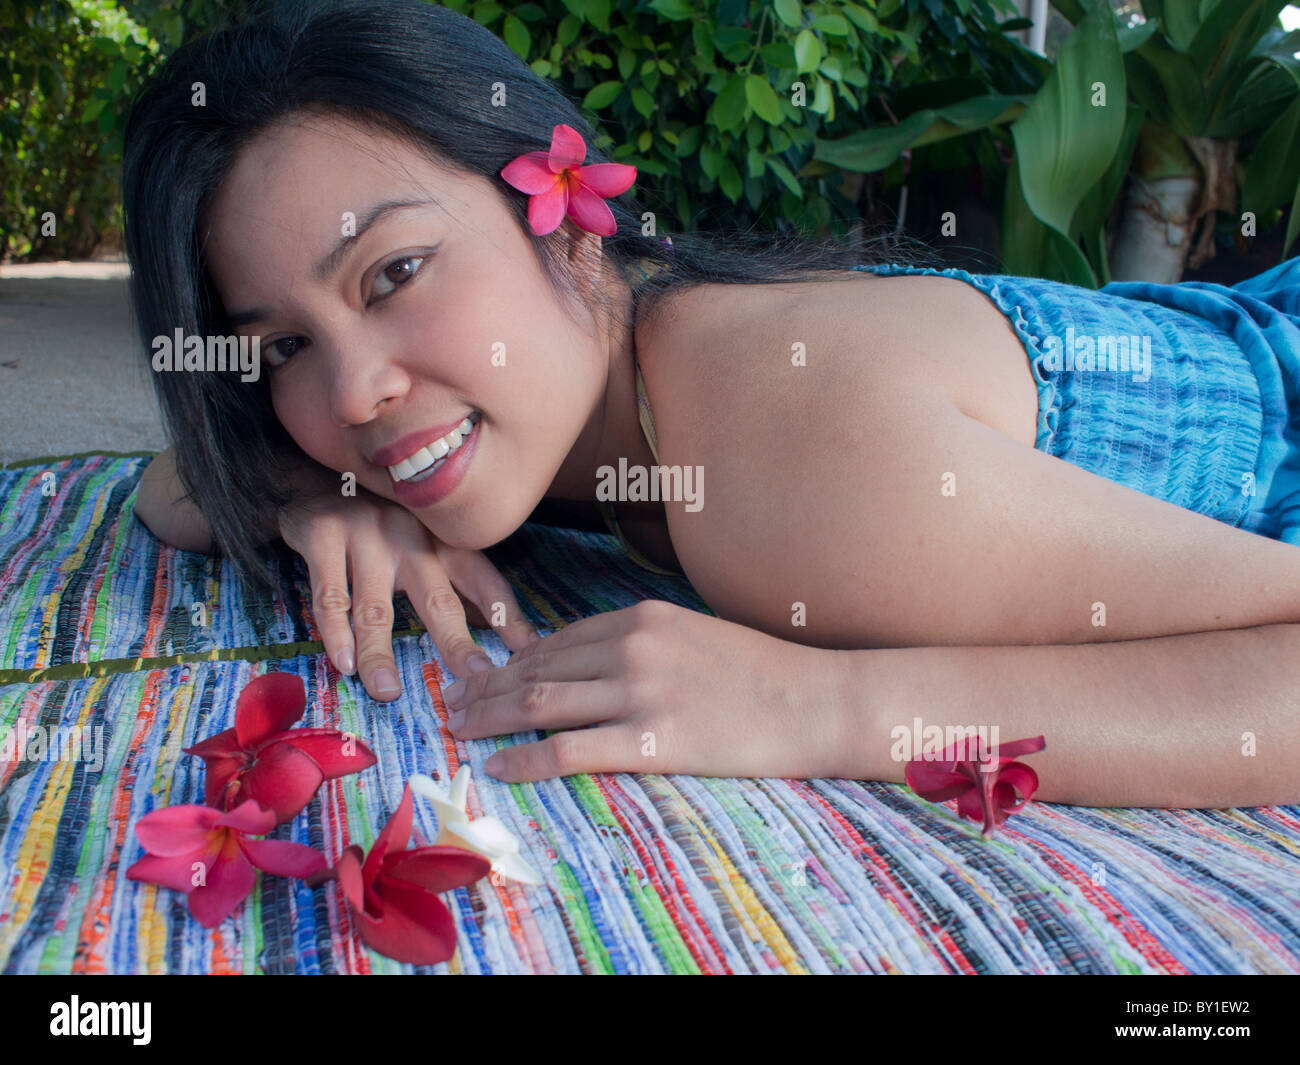 A women laying on the beach with pink plumeria flower Stock Photo